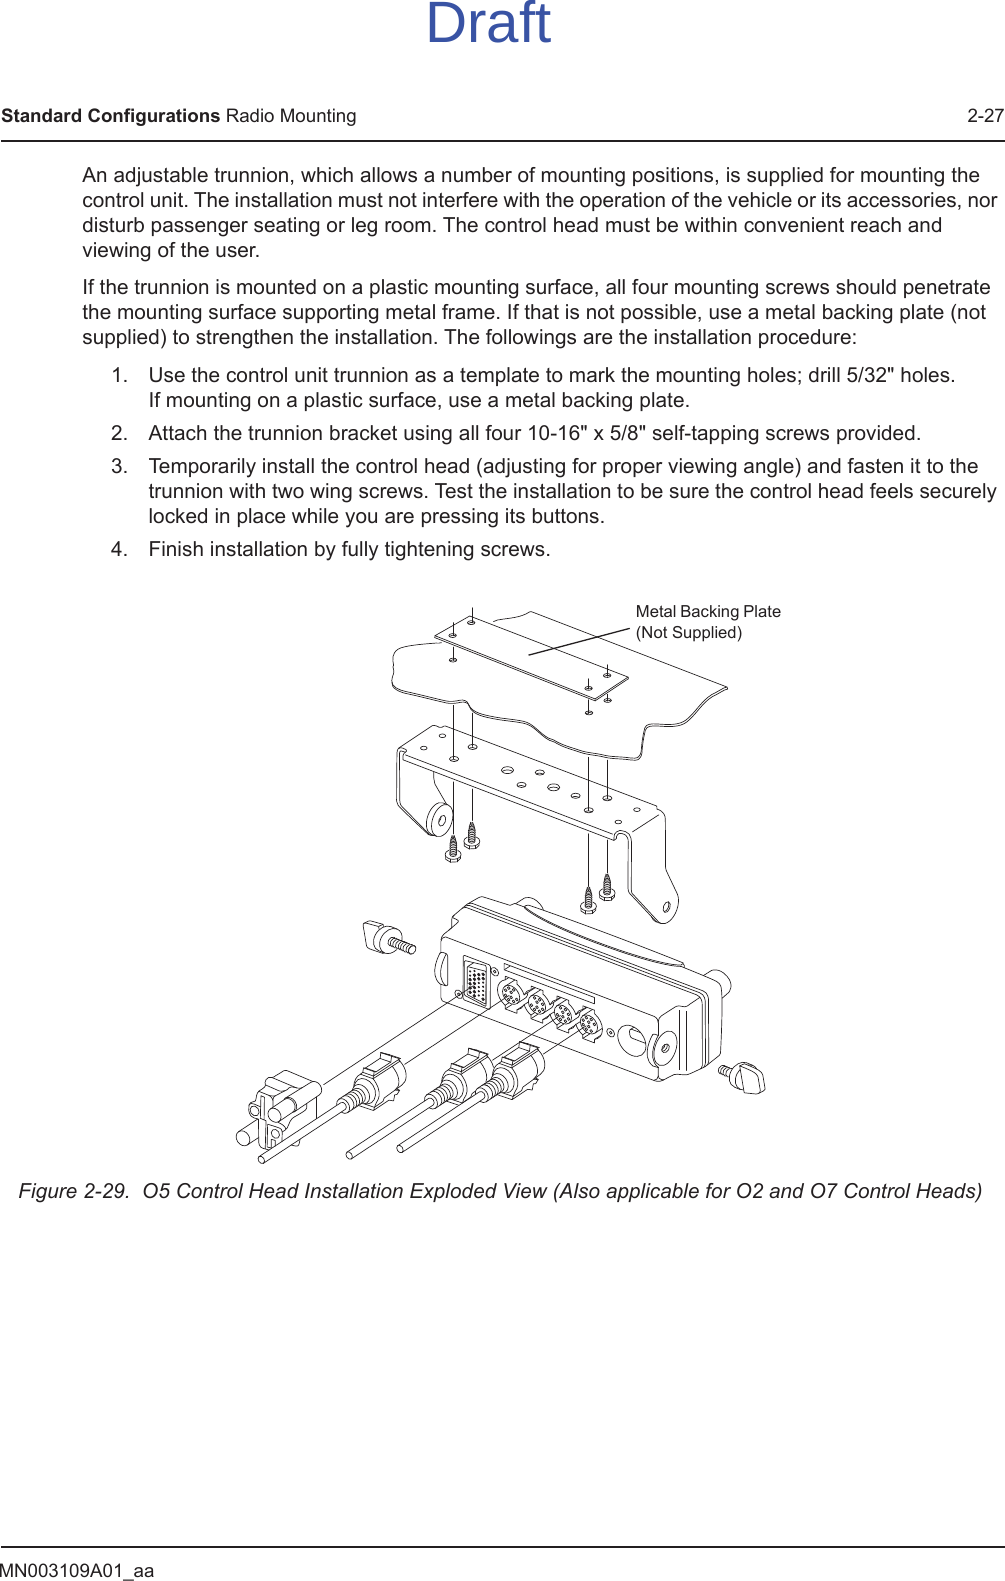 MN003109A01_aaStandard Configurations Radio Mounting 2-27An adjustable trunnion, which allows a number of mounting positions, is supplied for mounting the control unit. The installation must not interfere with the operation of the vehicle or its accessories, nor disturb passenger seating or leg room. The control head must be within convenient reach and viewing of the user.If the trunnion is mounted on a plastic mounting surface, all four mounting screws should penetrate the mounting surface supporting metal frame. If that is not possible, use a metal backing plate (not supplied) to strengthen the installation. The followings are the installation procedure:1. Use the control unit trunnion as a template to mark the mounting holes; drill 5/32&quot; holes.  If mounting on a plastic surface, use a metal backing plate.2. Attach the trunnion bracket using all four 10-16&quot; x 5/8&quot; self-tapping screws provided.3. Temporarily install the control head (adjusting for proper viewing angle) and fasten it to the trunnion with two wing screws. Test the installation to be sure the control head feels securely locked in place while you are pressing its buttons.4. Finish installation by fully tightening screws.Figure 2-29.  O5 Control Head Installation Exploded View (Also applicable for O2 and O7 Control Heads)Metal Backing Plate (Not Supplied)Draft